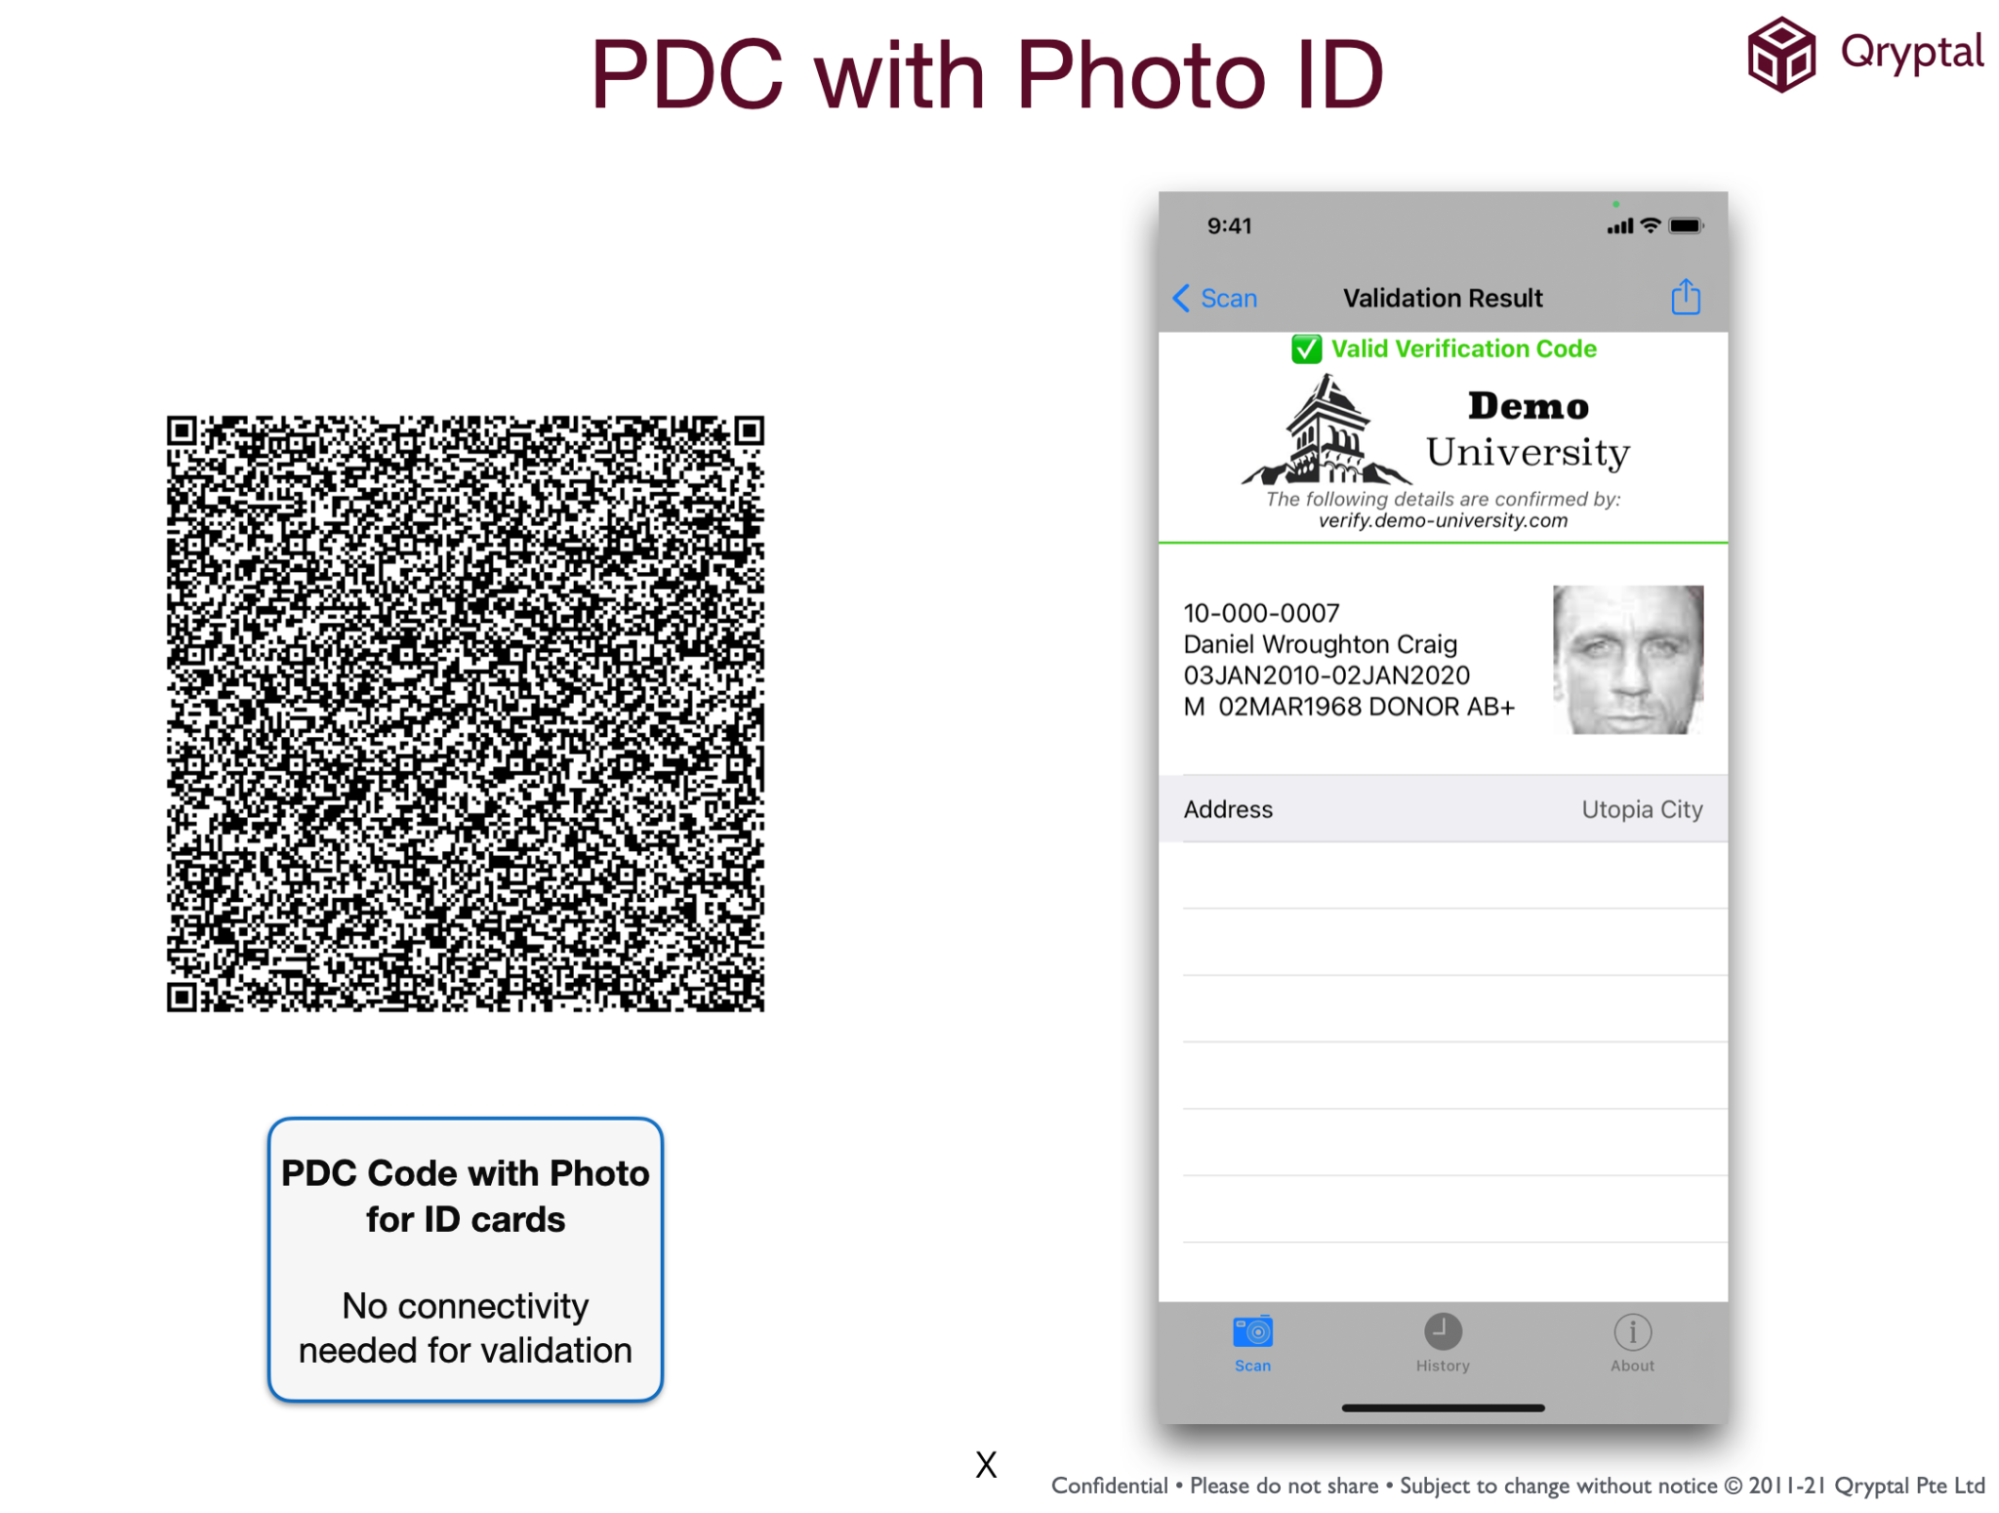 PDC code with photo